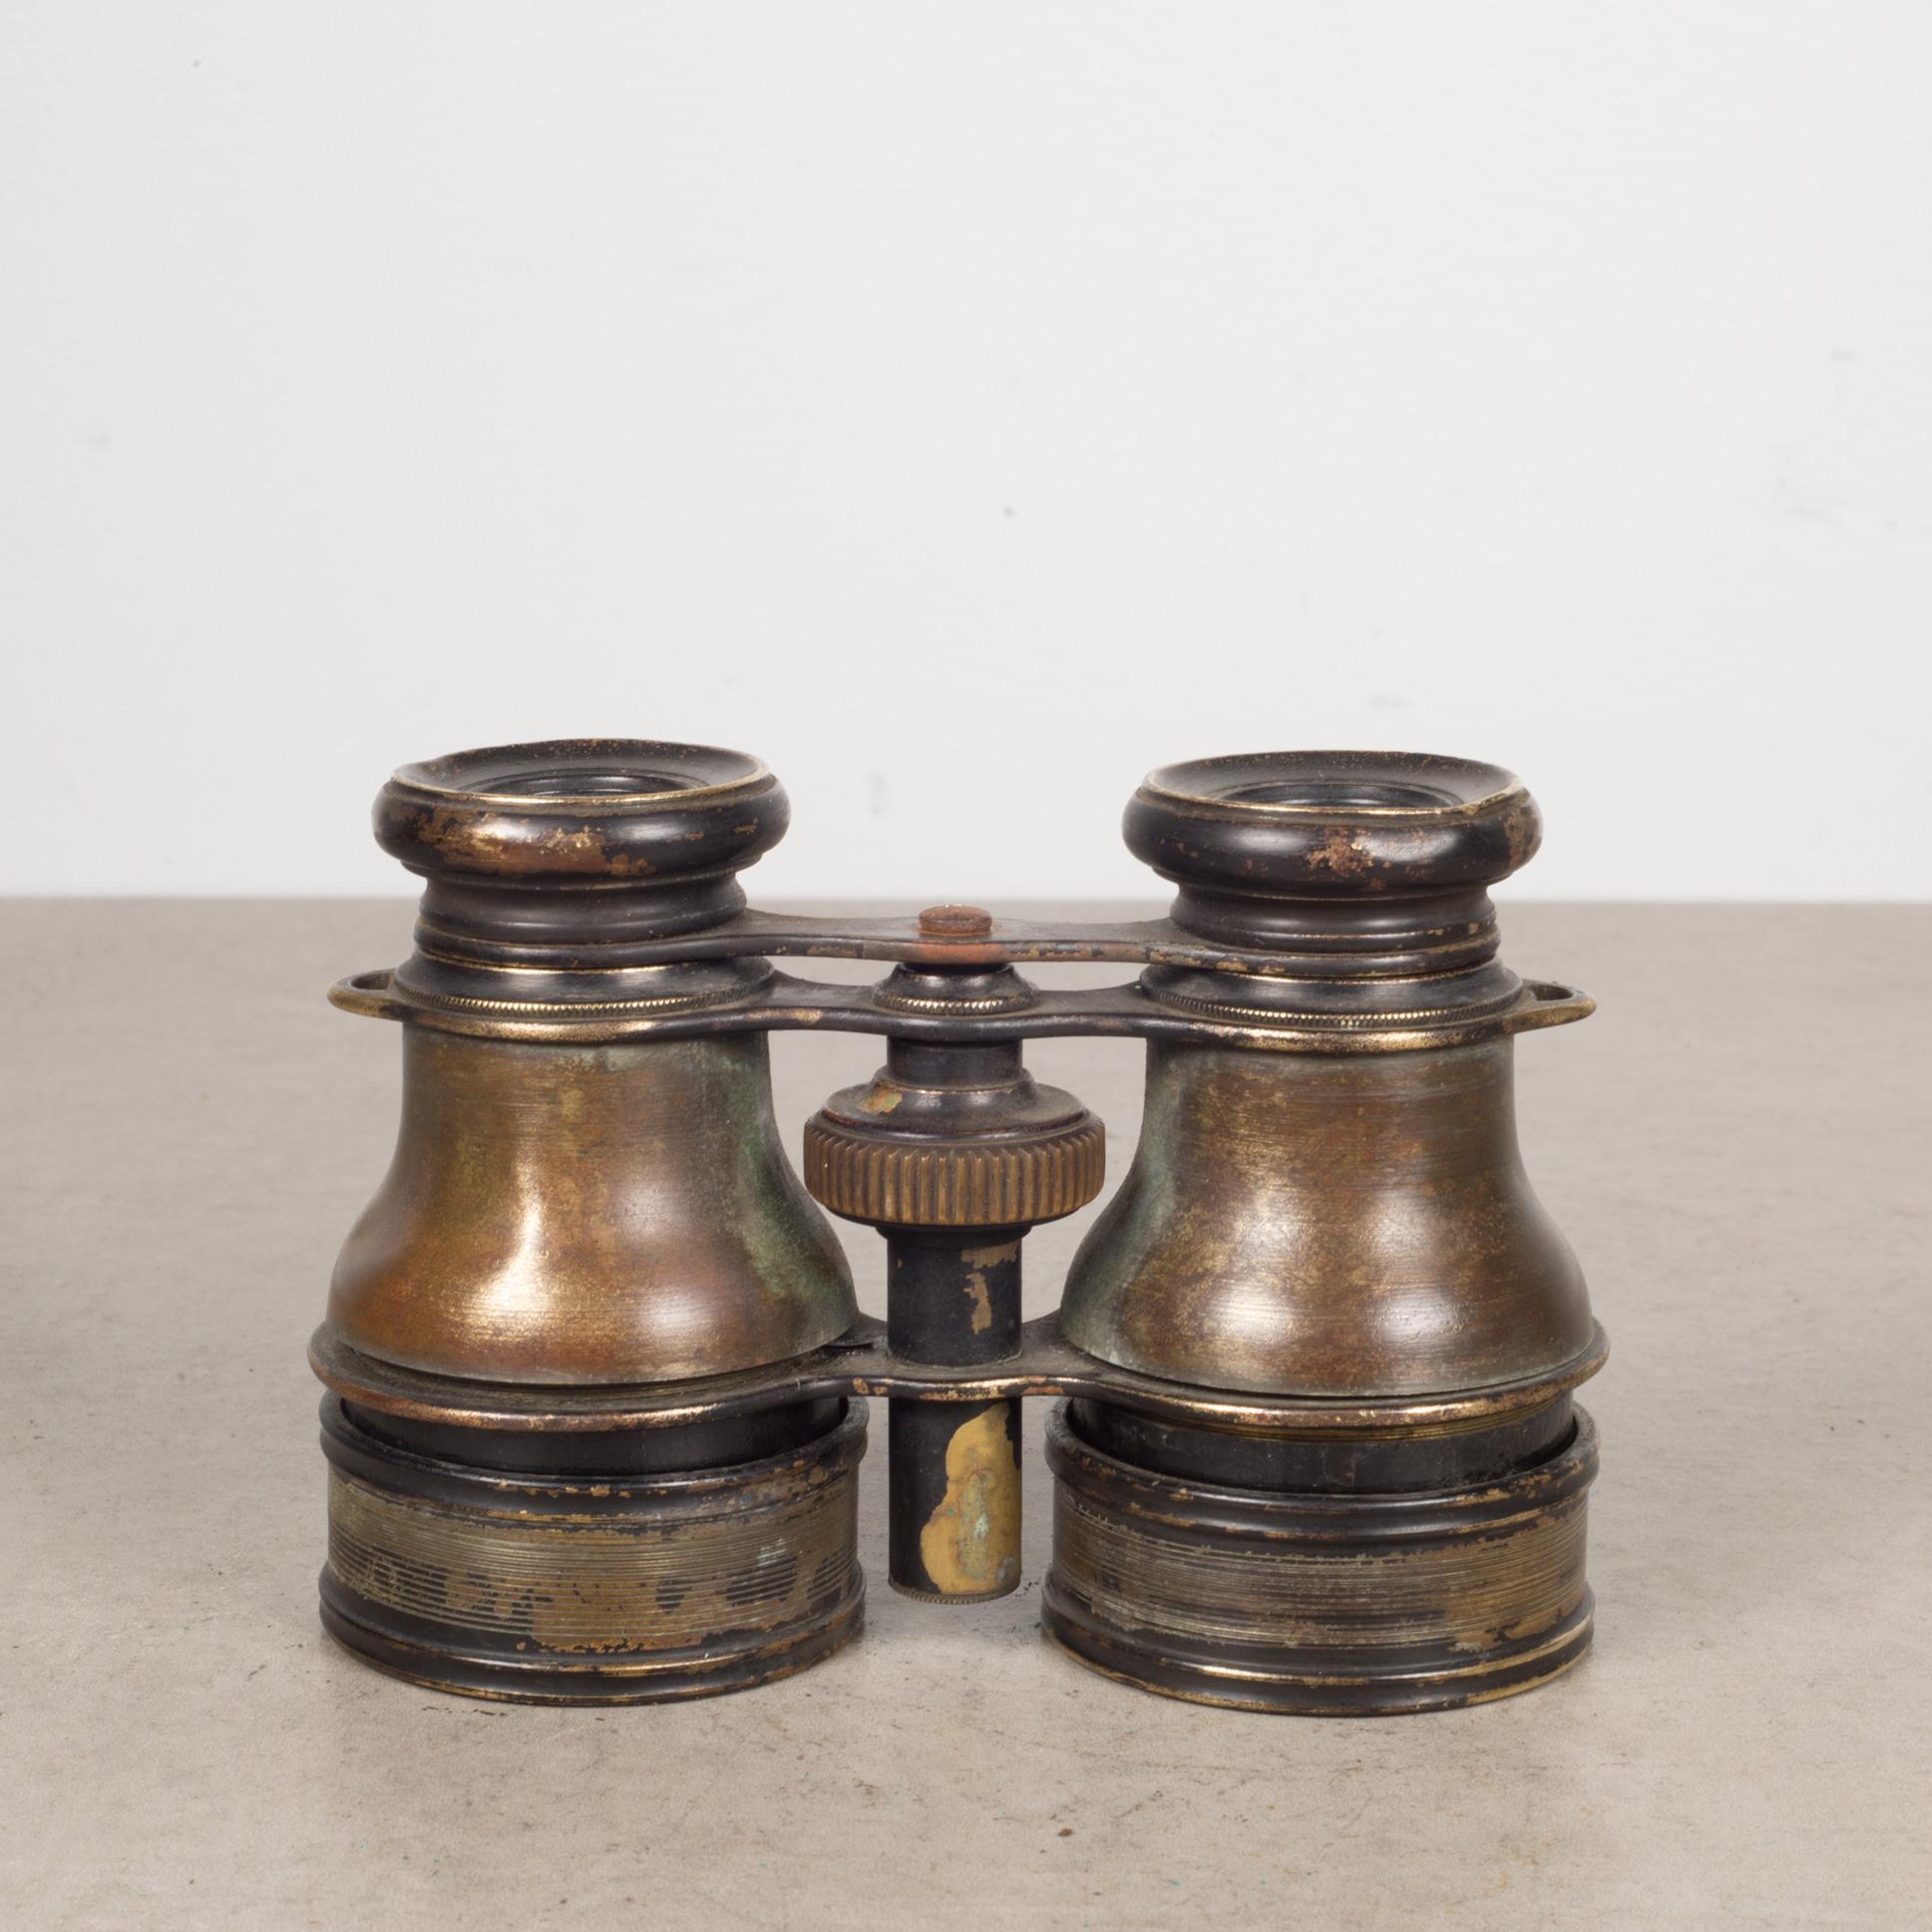 ABOUT

An original pair of brass expandable binoculars. The brass focus wheel works well and their optics are good.

    CREATOR Possible French. 
    DATE OF MANUFACTURE c.1880s.
    MATERIALS AND TECHNIQUES  Brass, Metal, Optical Glass.
   